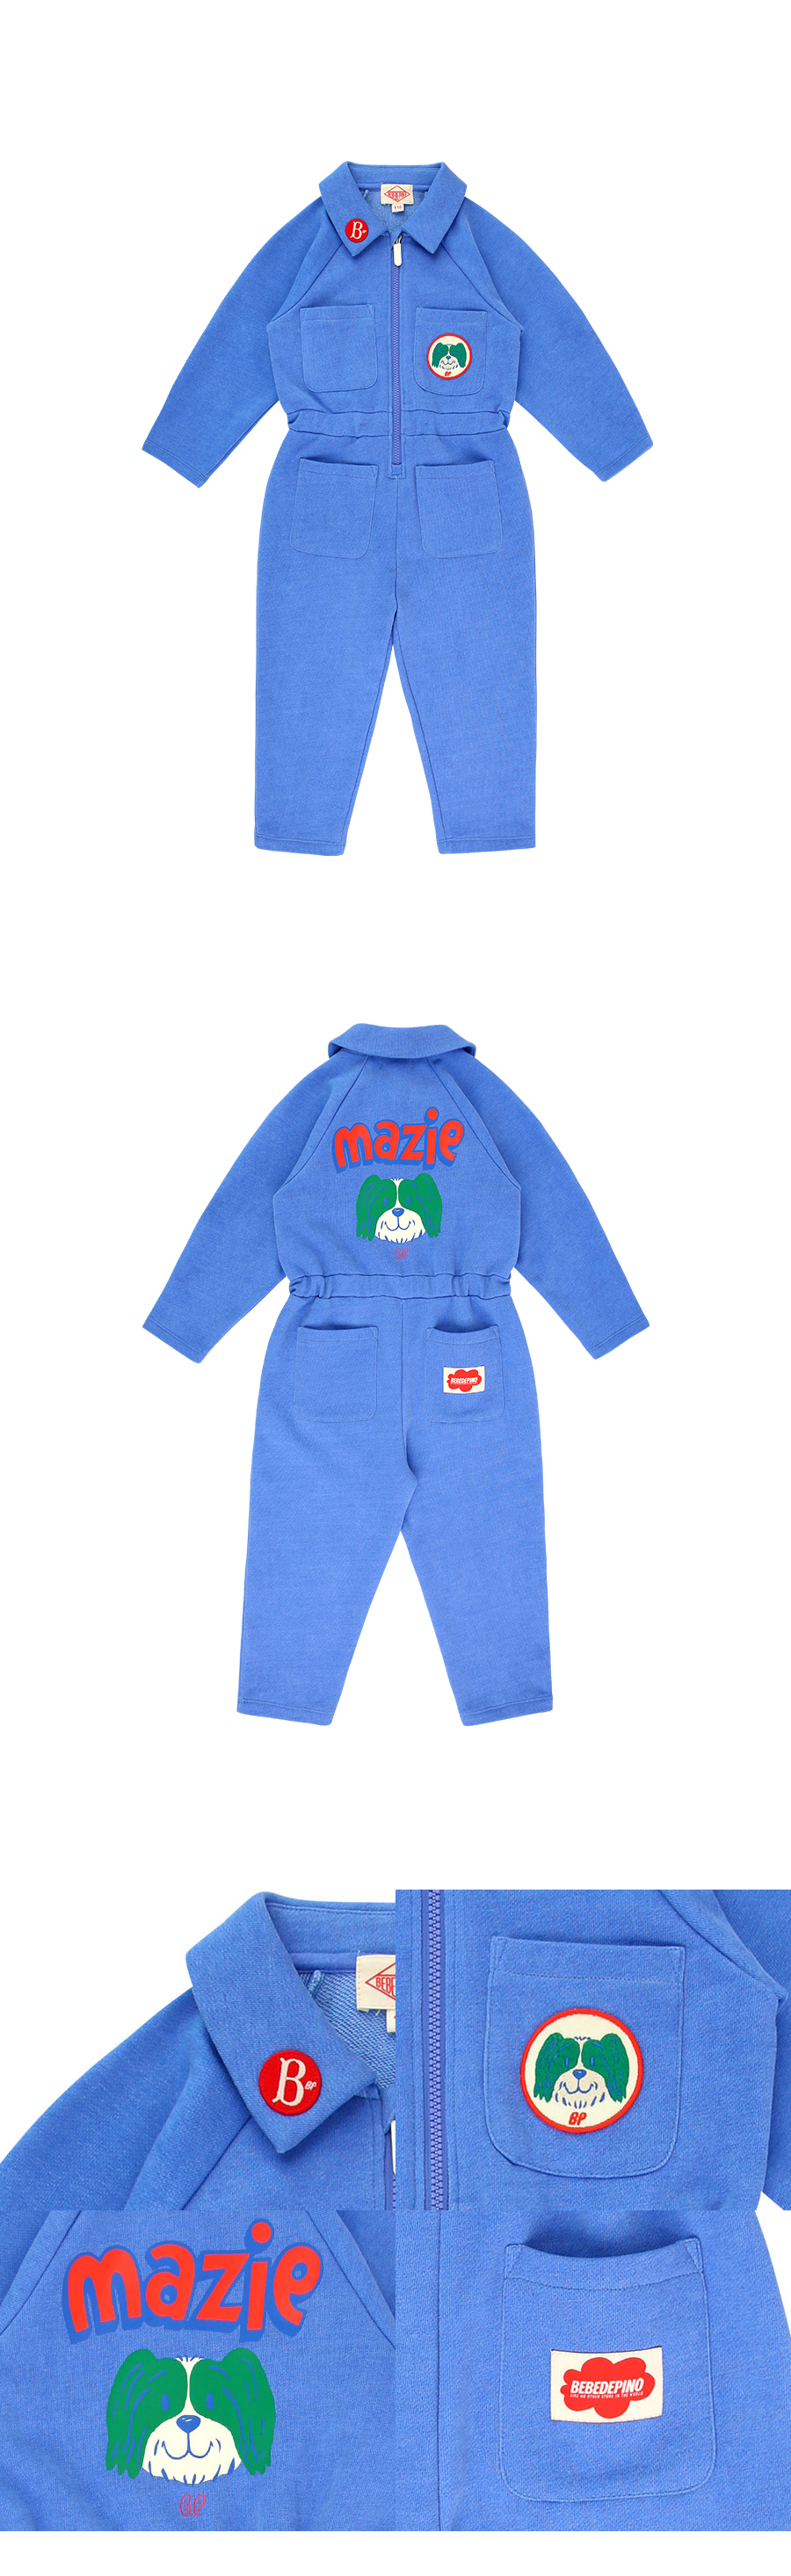 Mazie out pocket zip up jump suit 상세 이미지